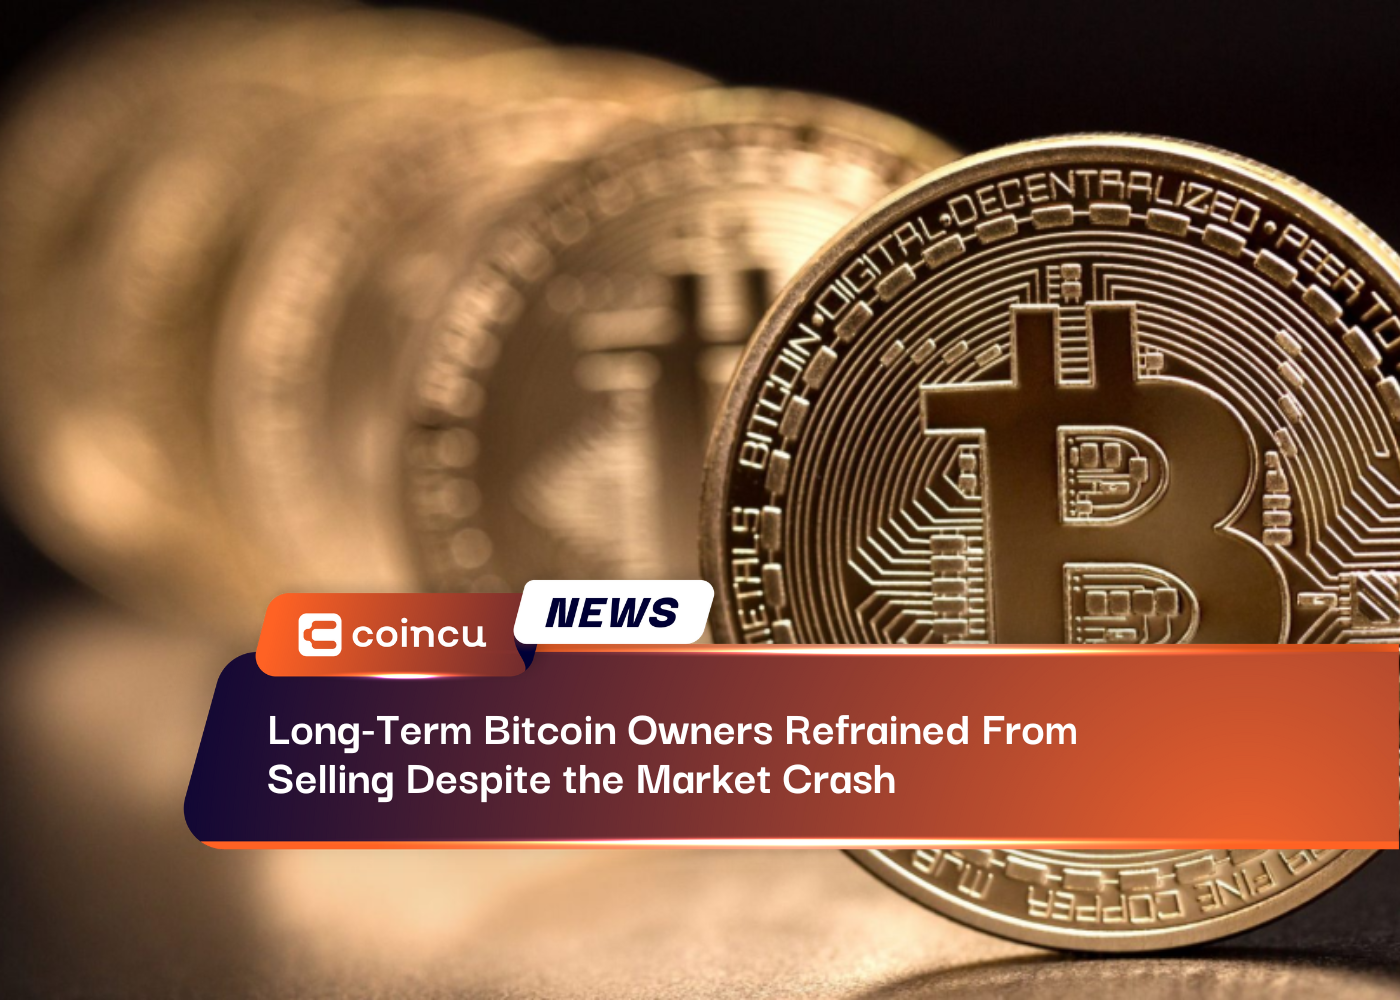 Long-Term Bitcoin Owners Refrained From Selling Despite the Market Crash